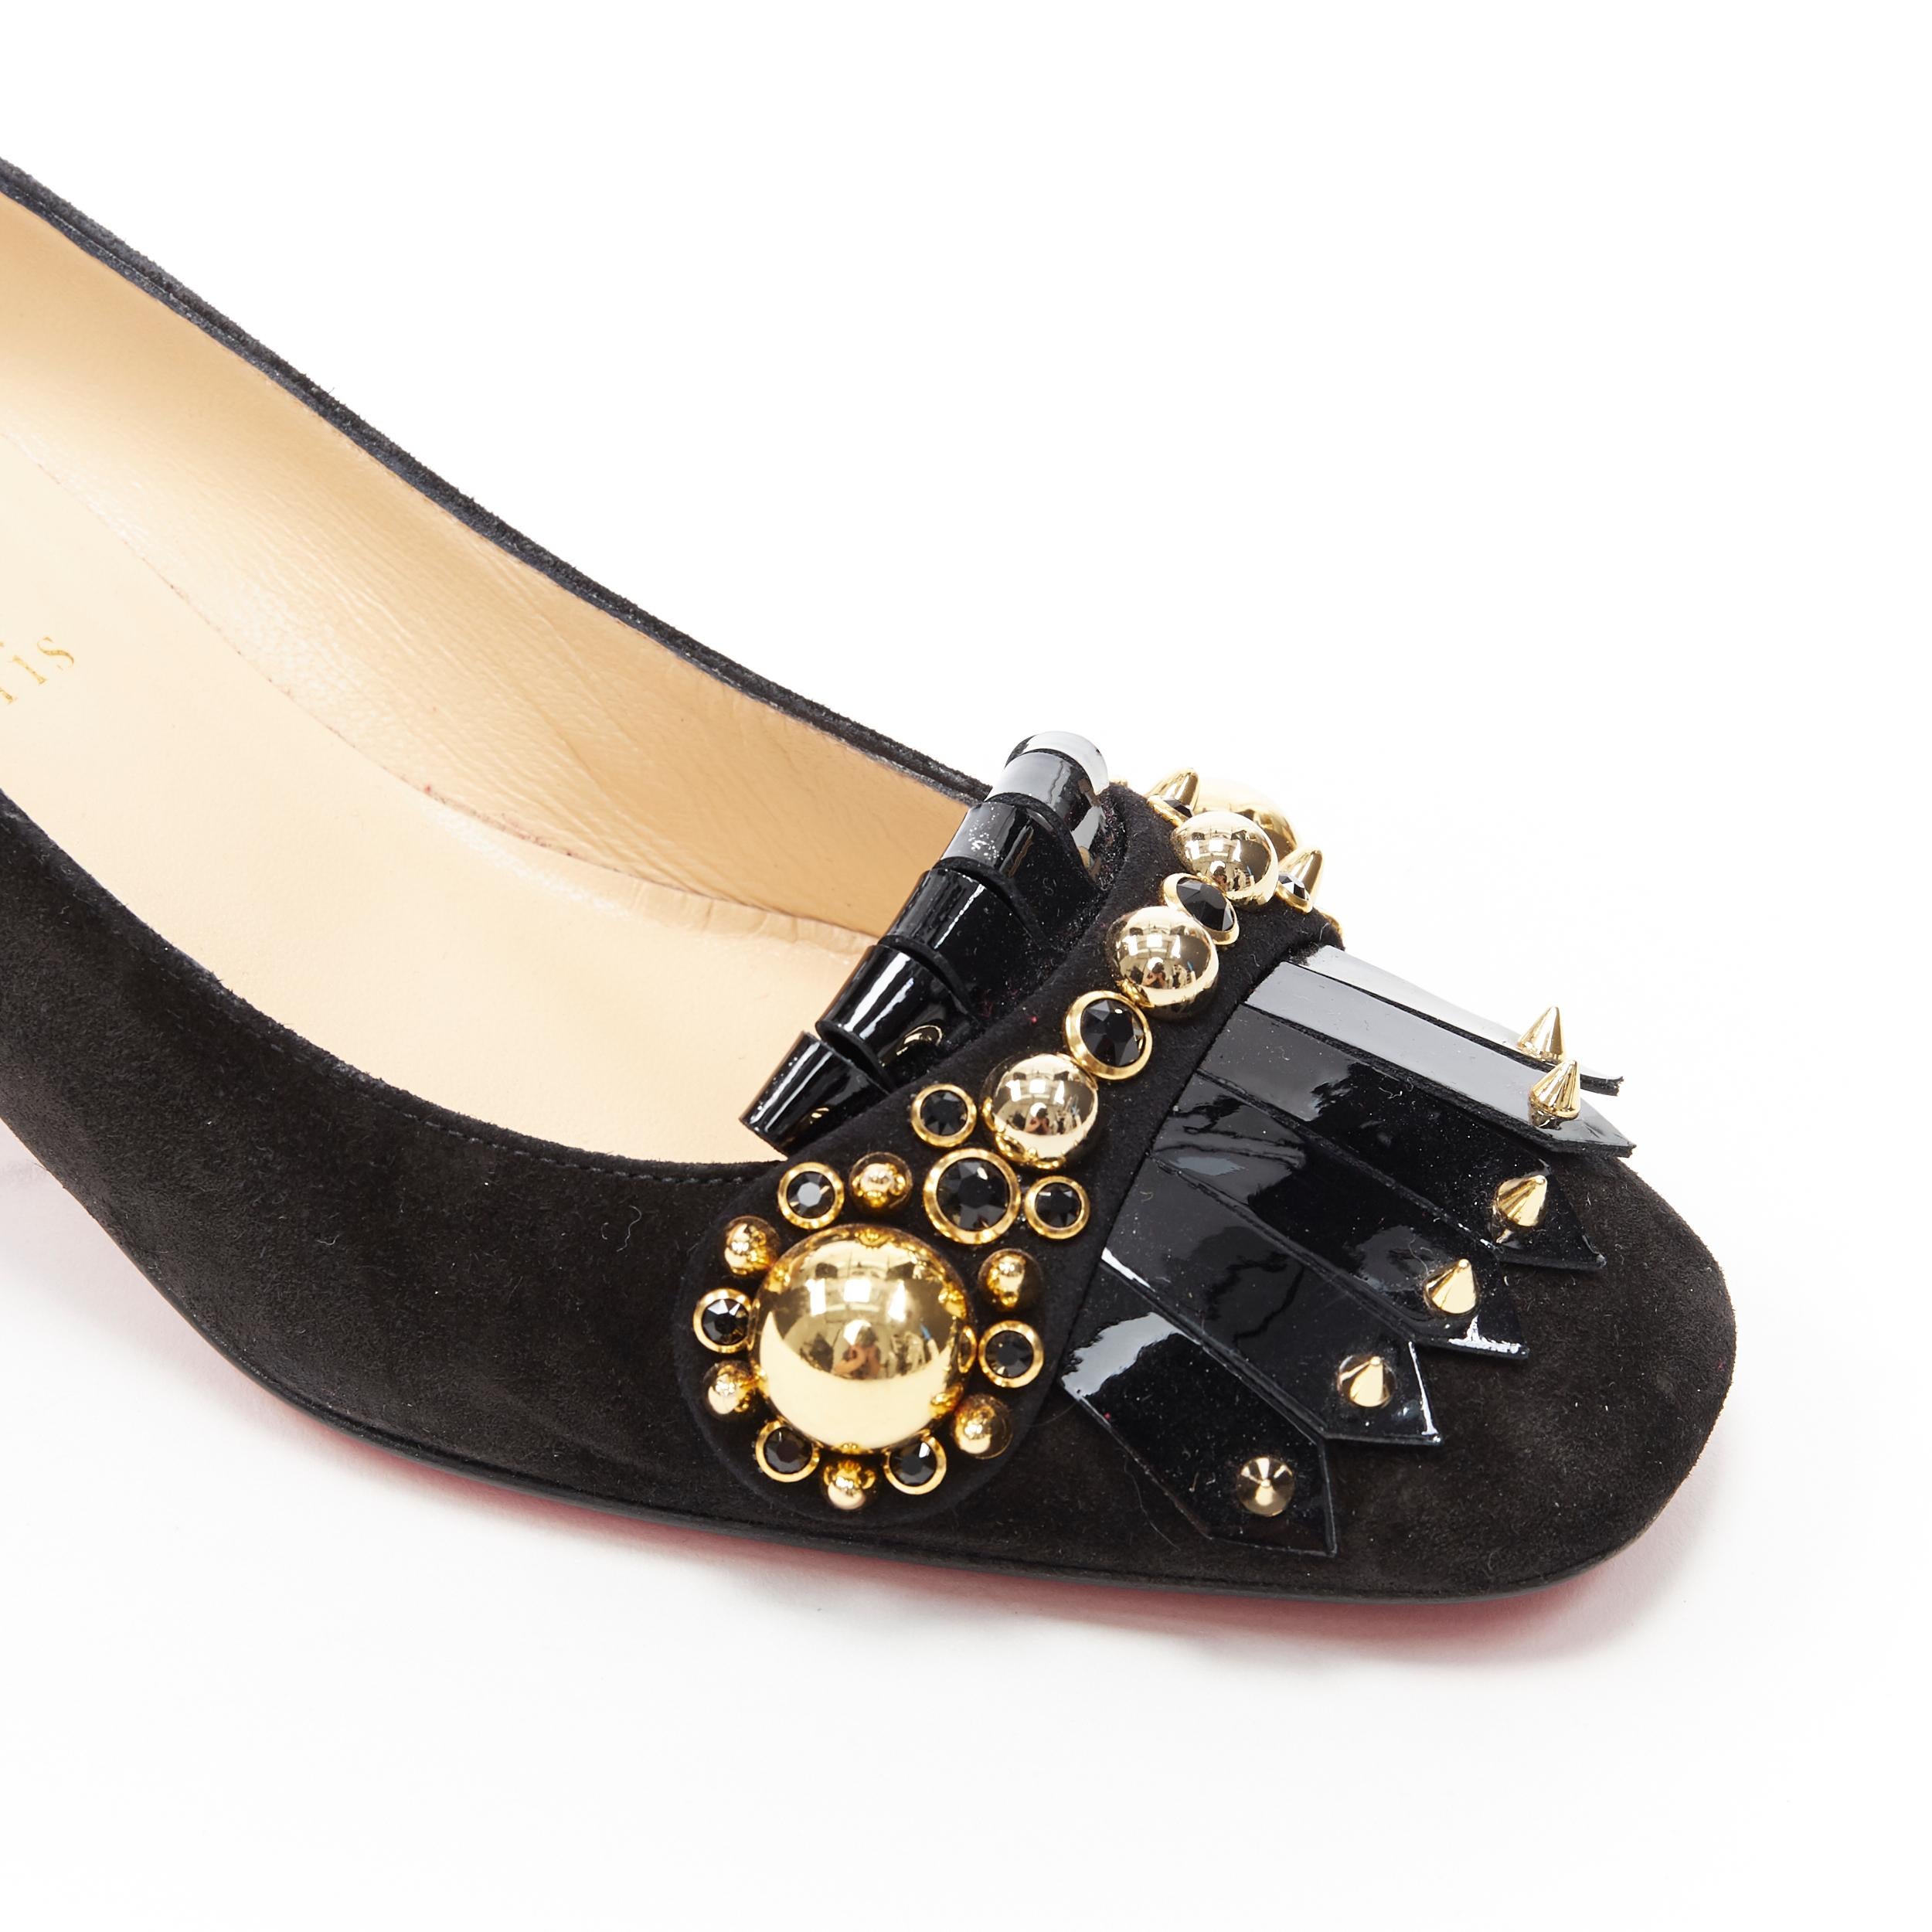 CHRISTIAN LOUBOUTIN Kiltie black suede fringe stud strass block heel EU38.5
Brand: Christian Louboutin
Designer: Christian Louboutin
Model Name / Style: Kiltie 
Material: Suede
Color: Black
Pattern: Solid
Extra Detail: Rounded square toe. Gold-tone